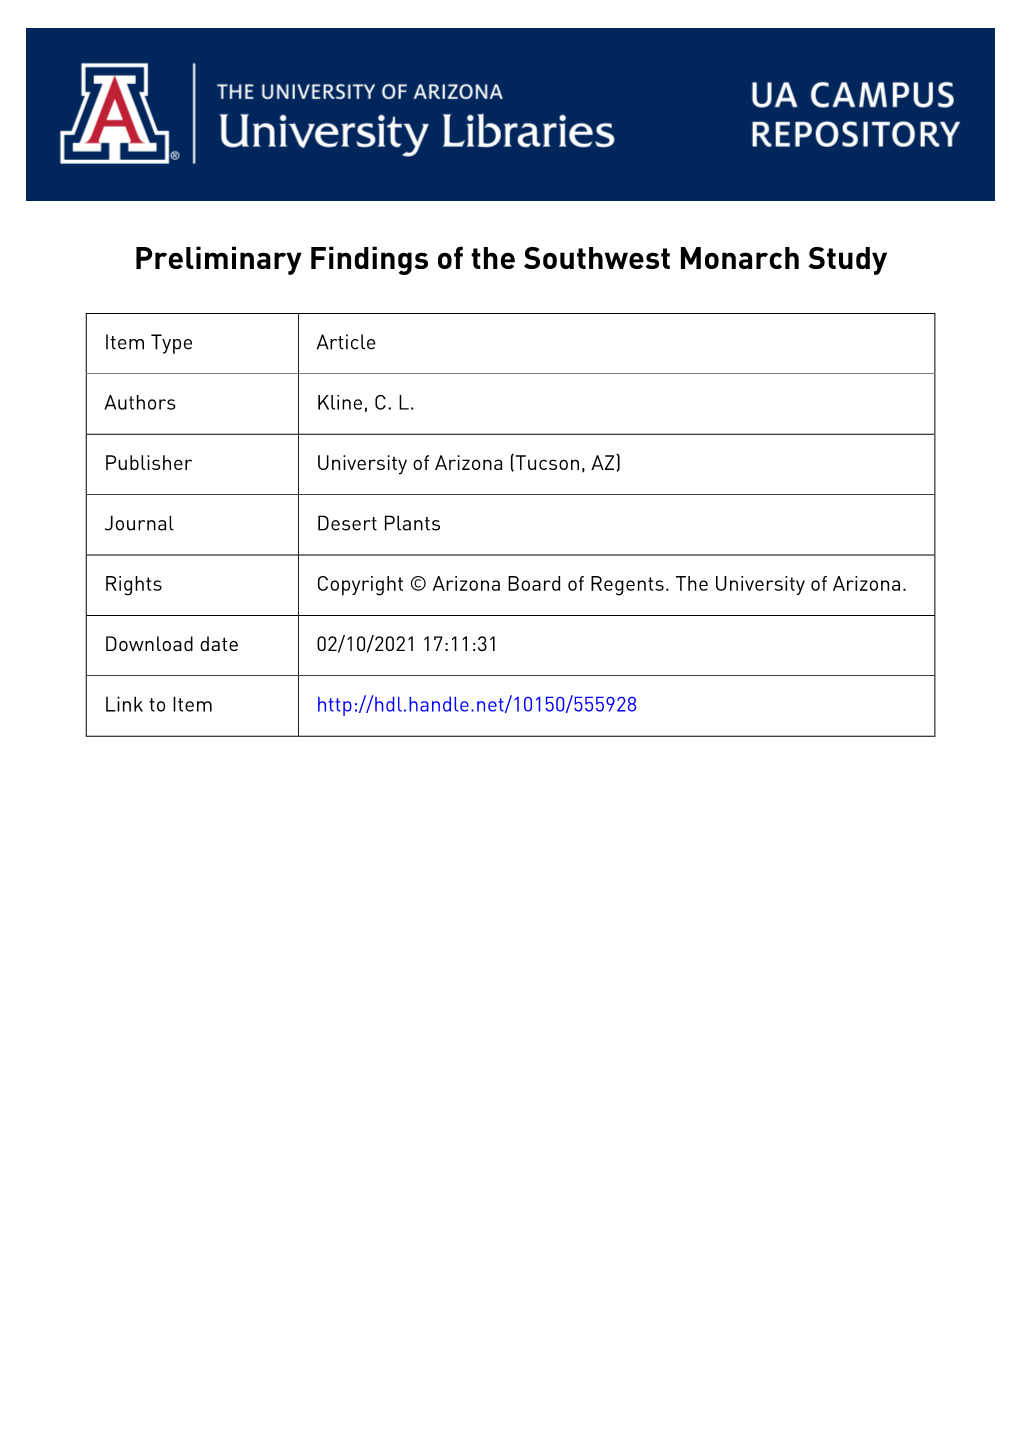 Preliminary Findings of the Southwest Monarch Study